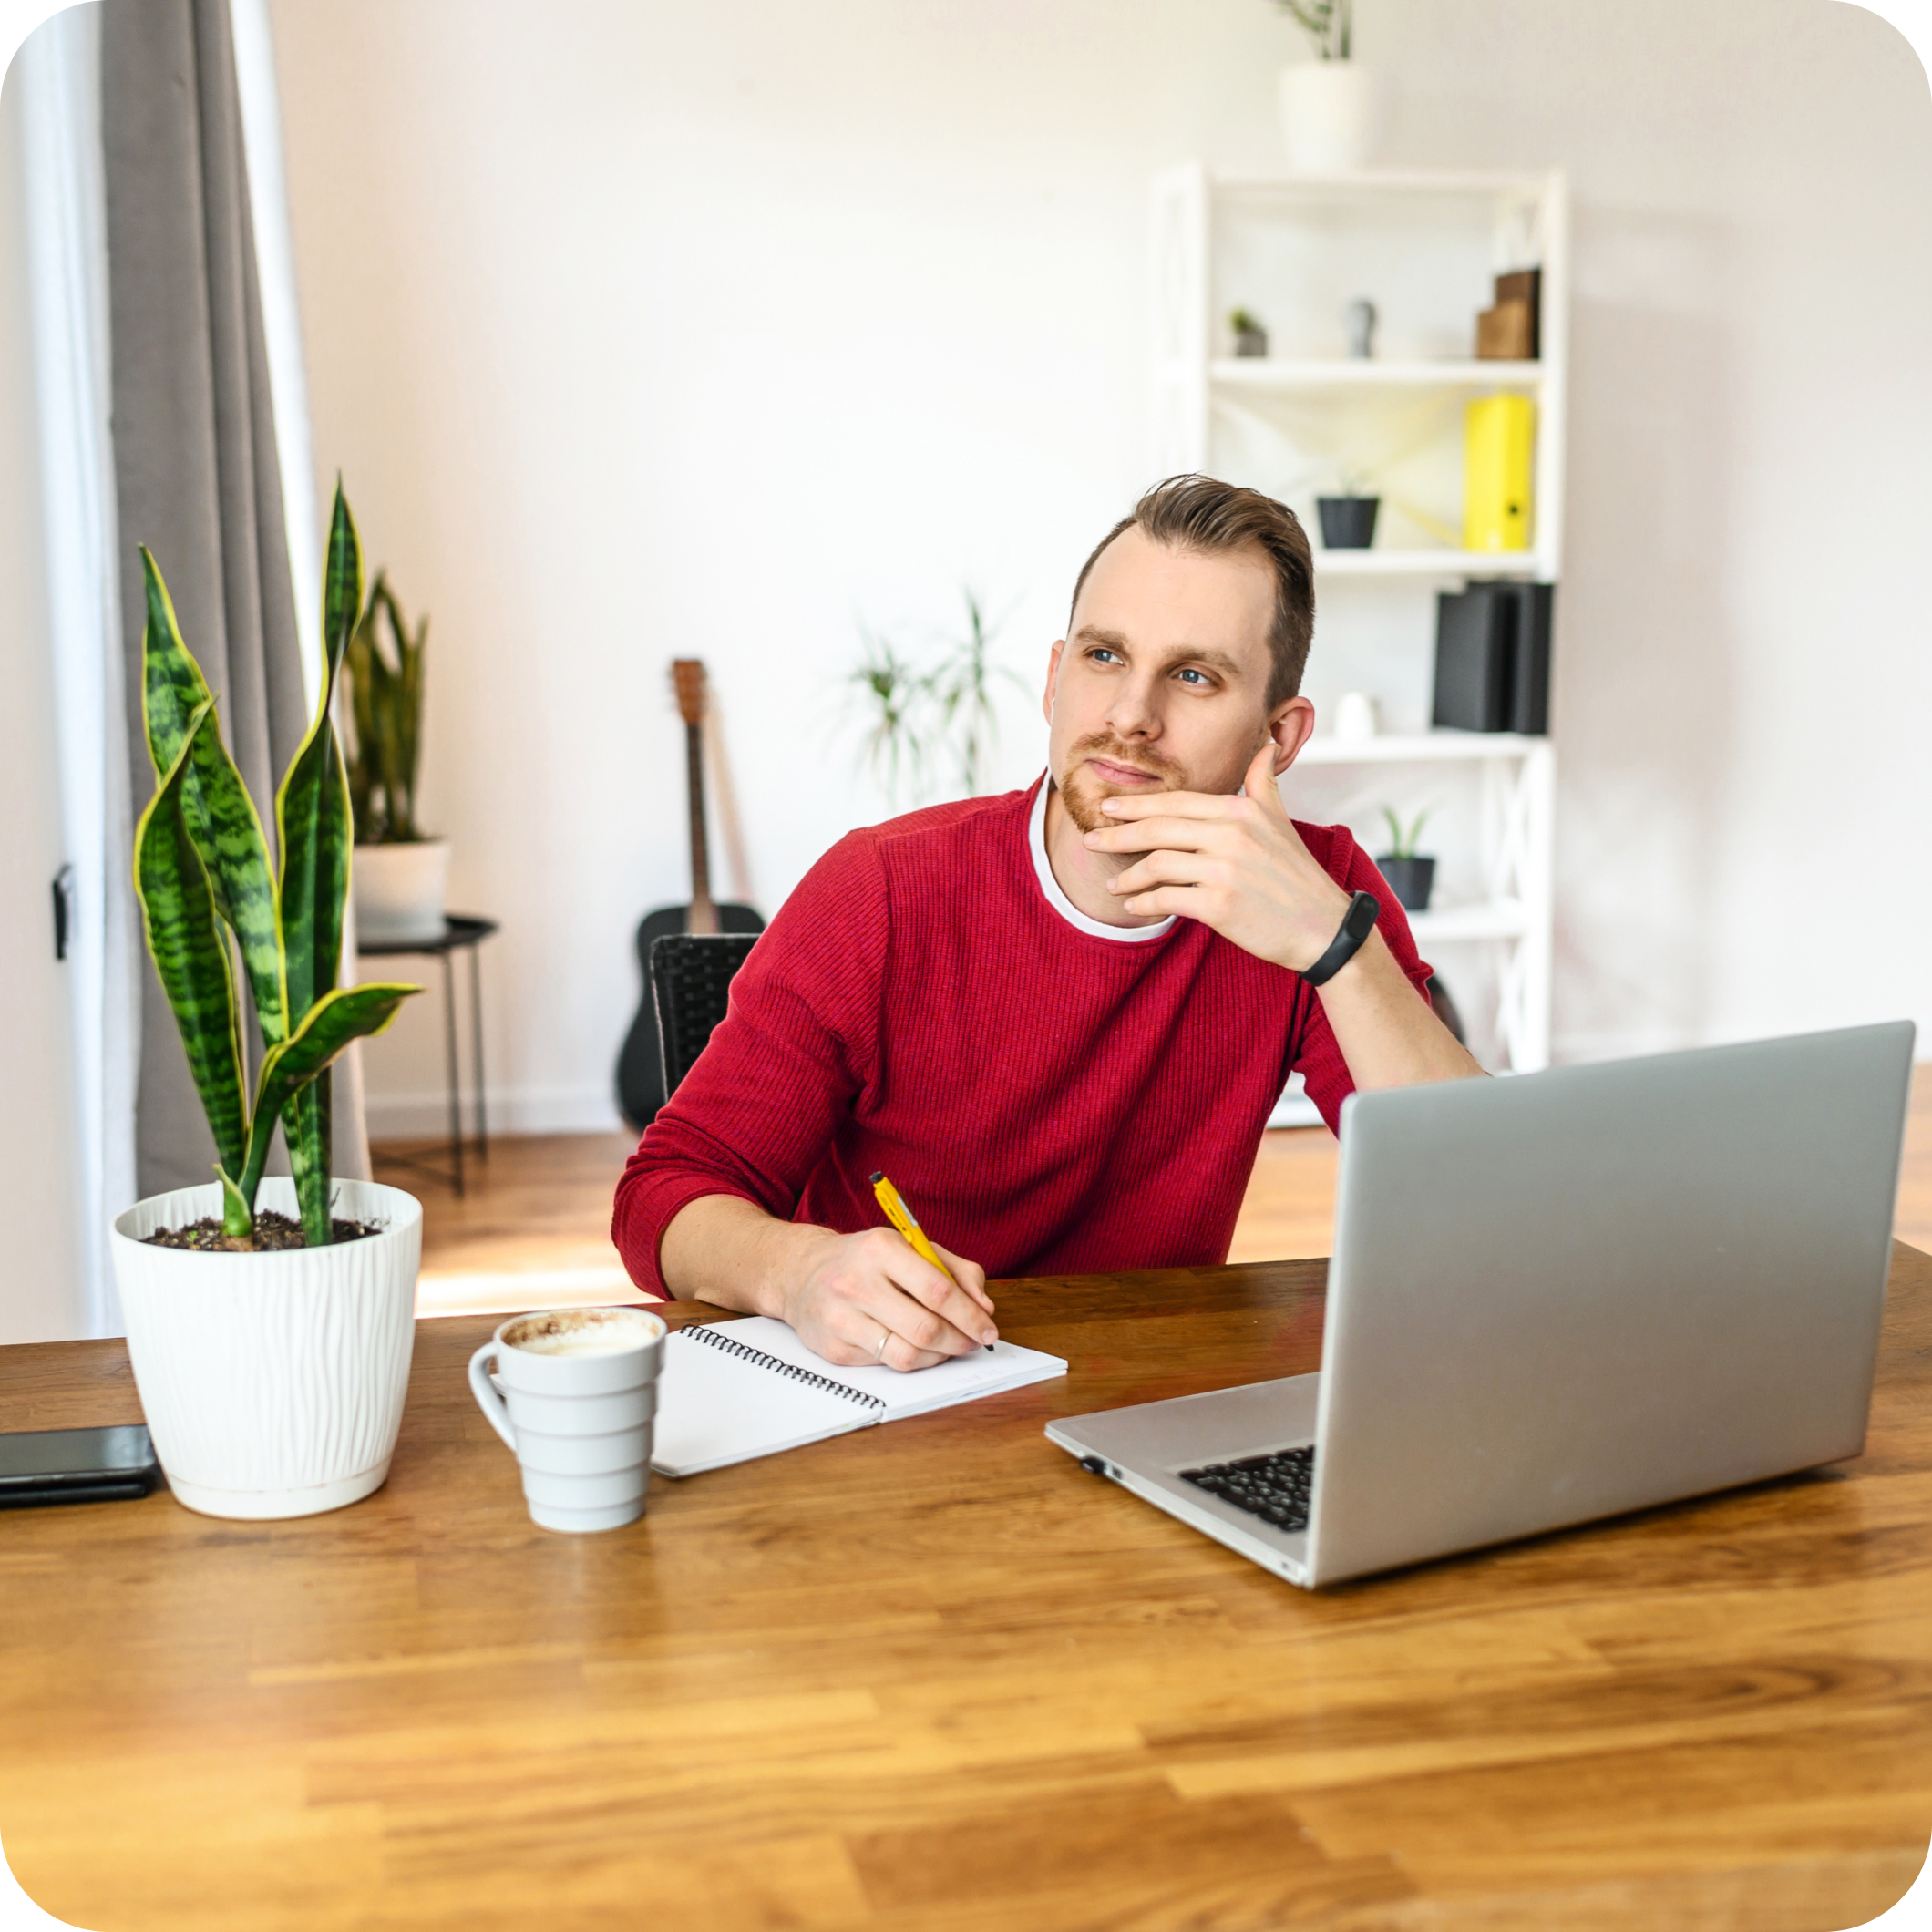 Young man with goatee and red sweater sitting at desk in a thoughtful pose, thinking what he wants to write for his online dating profile on his paper or his laptop.